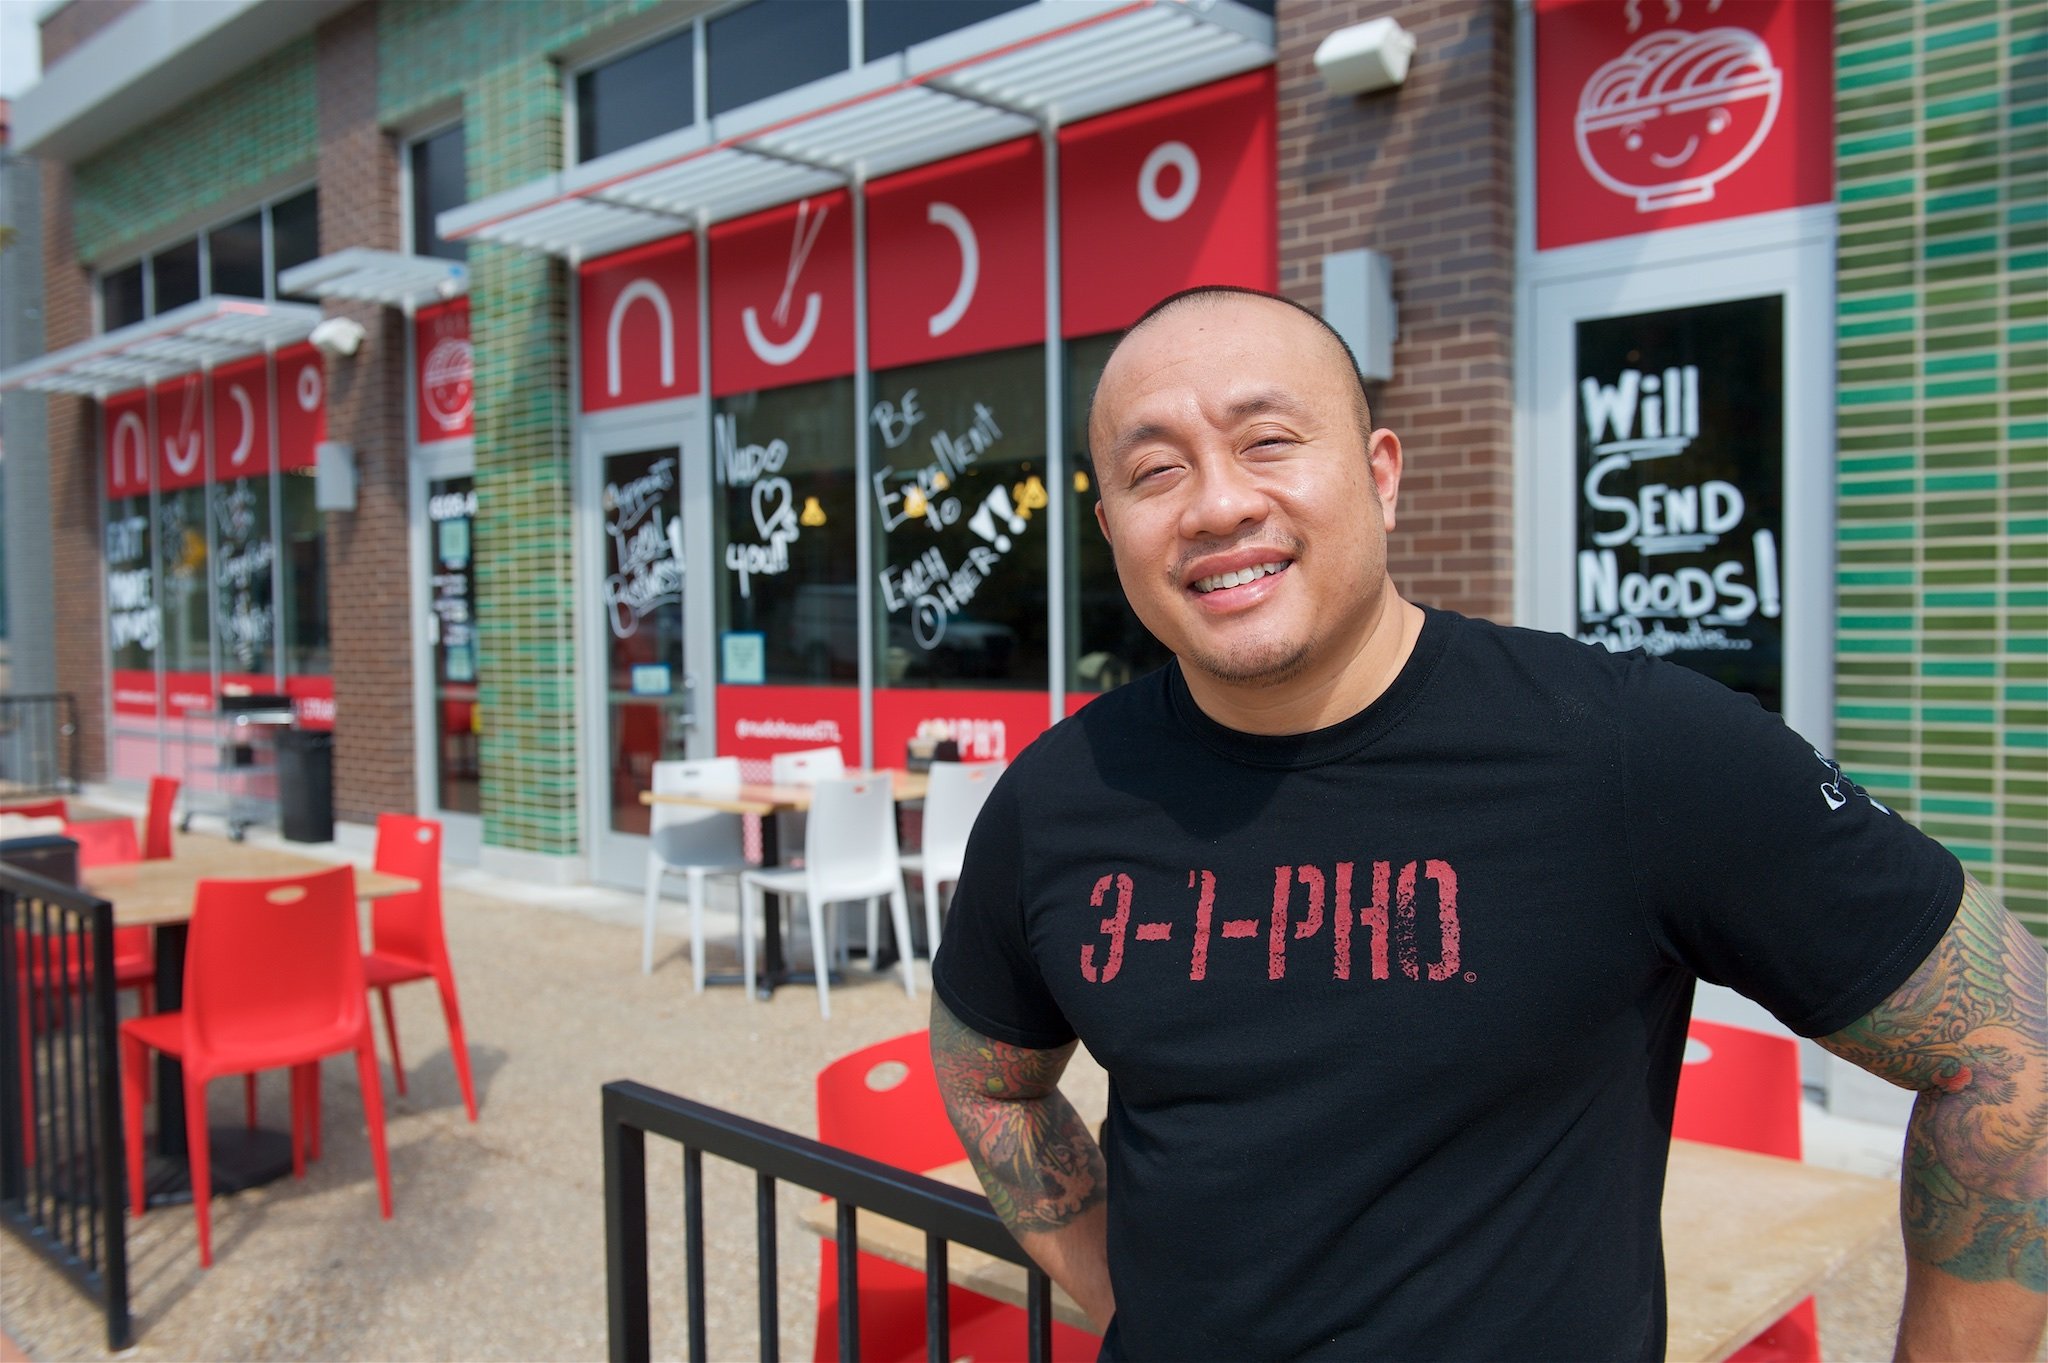  “Even though I was born in Vietnam, I’m a St. Louis boy through and through. I grew up in The Hill in the ’80s and ’90s. I’m proud to be a St. Louisan. This is my city. I ain’t going anywhere.”  - Qui Tran, founder of  Nudo House STL , and co-owner 